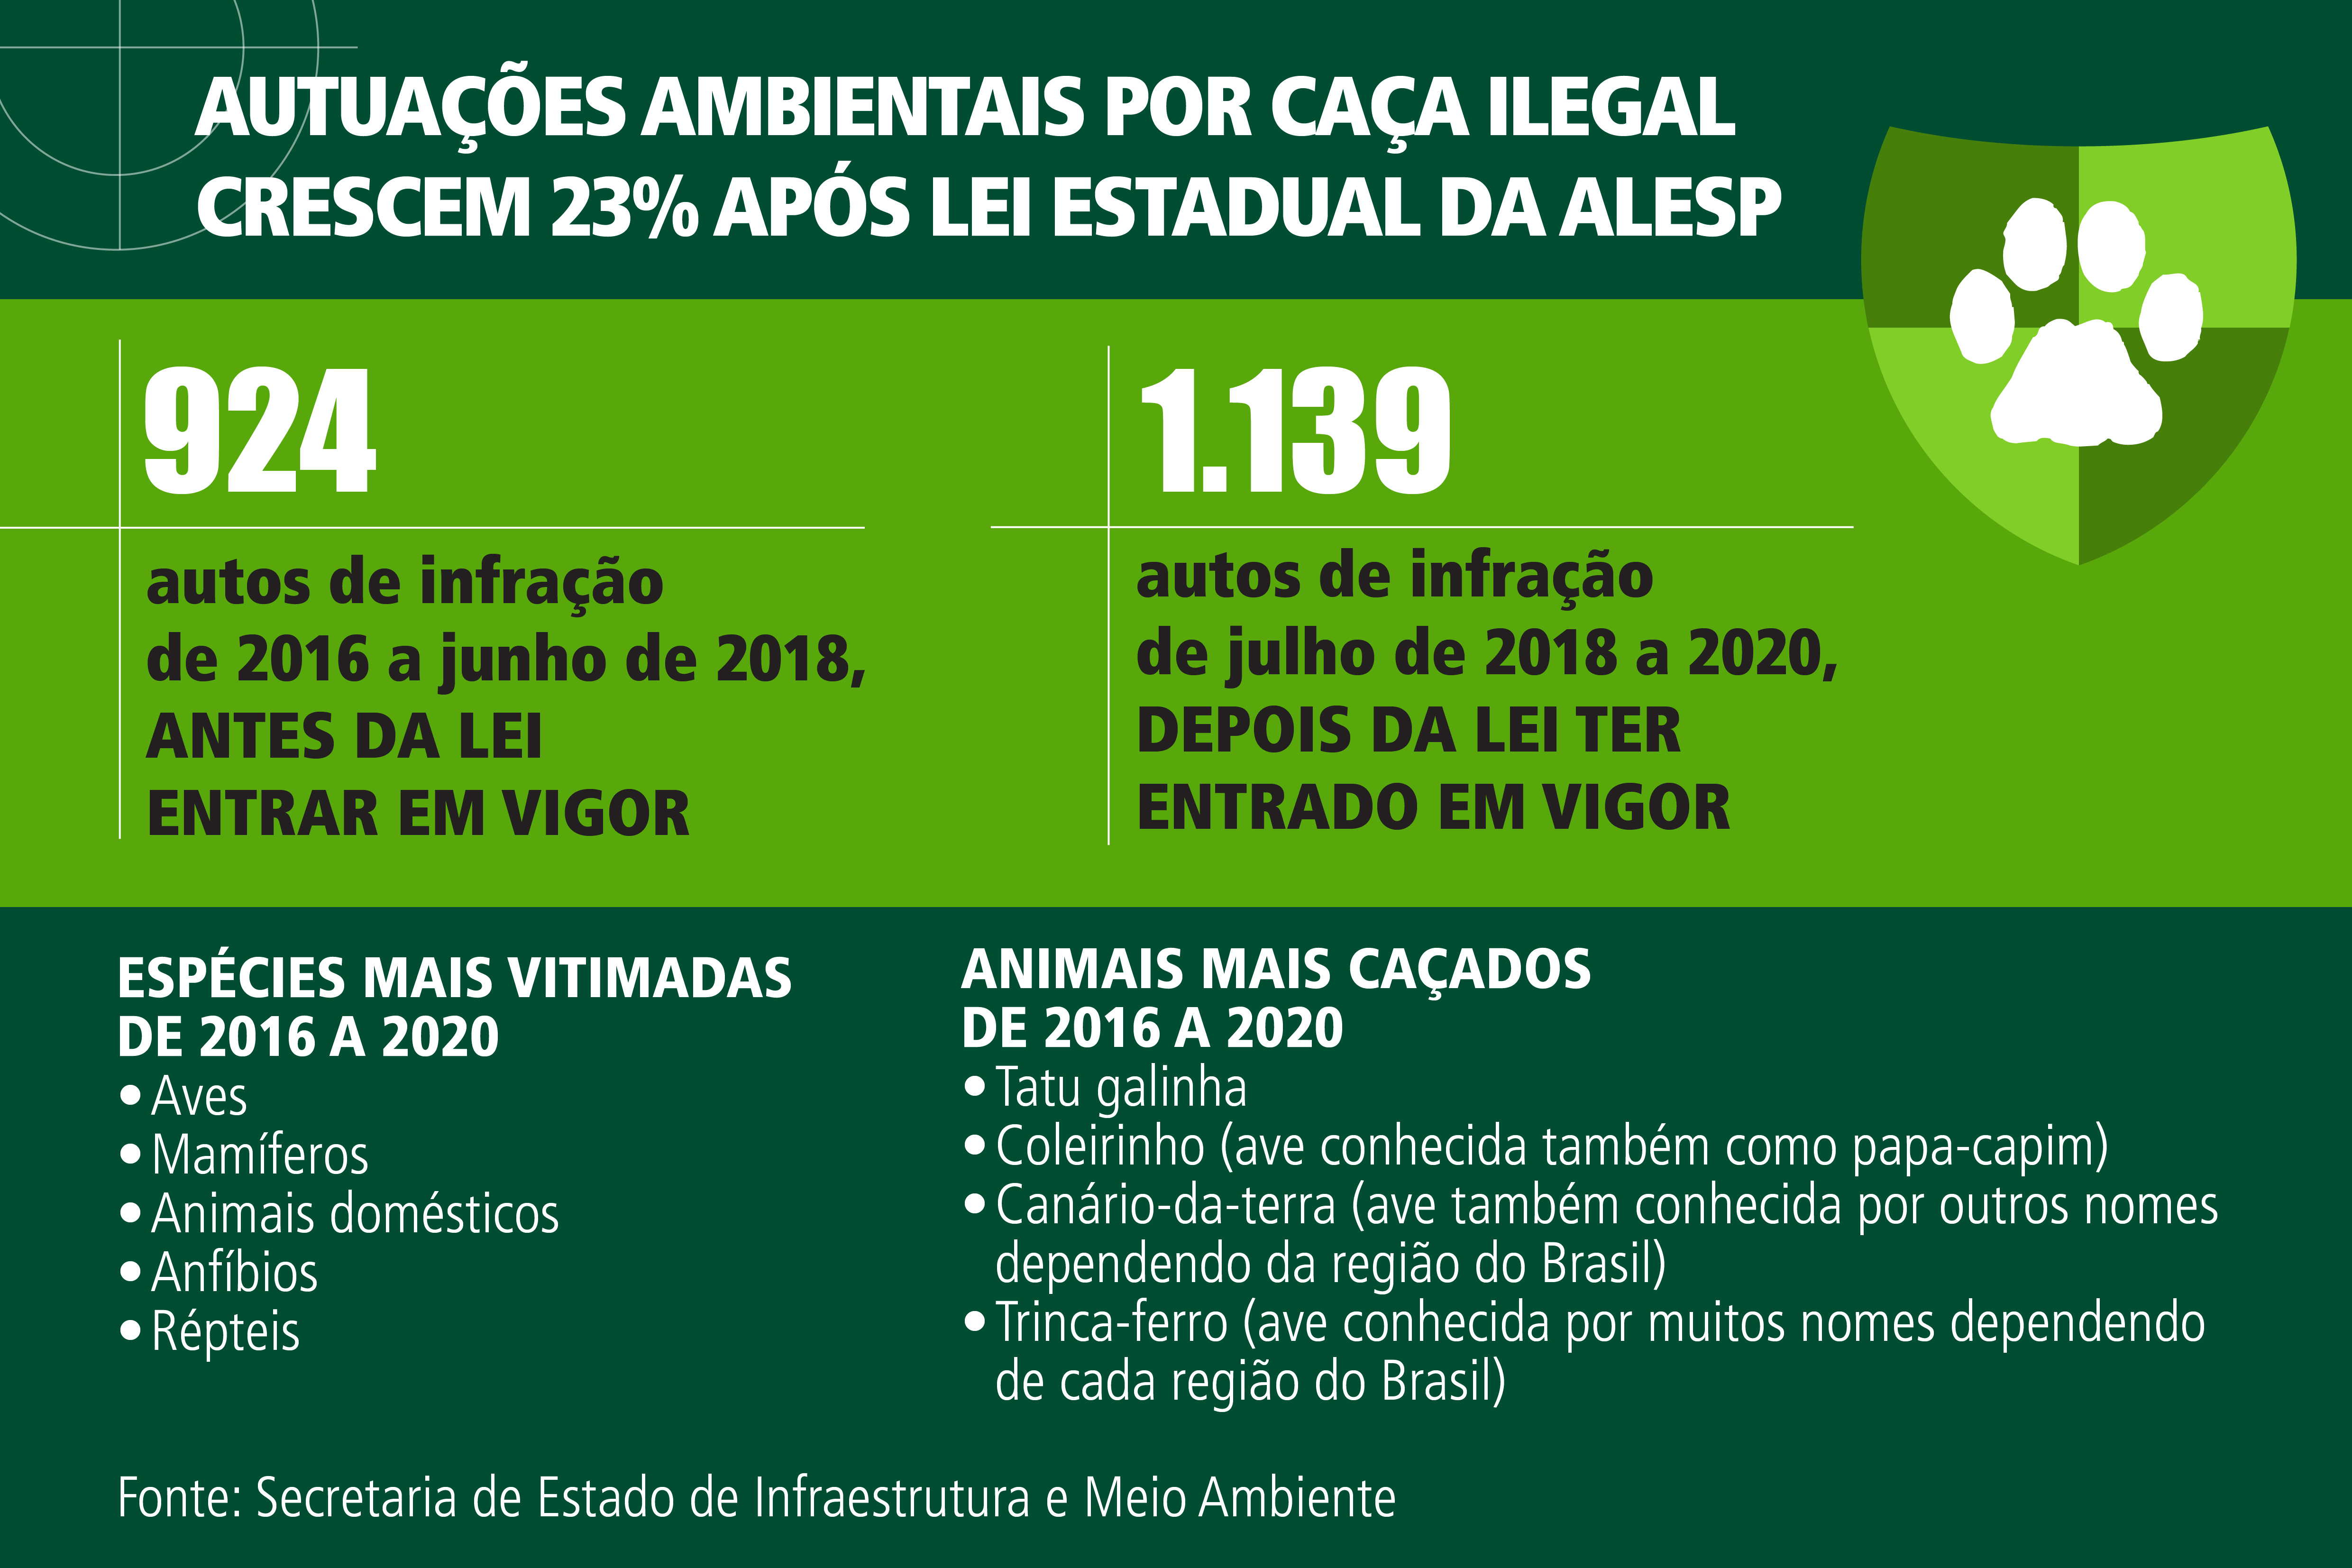 Infográfico<a style='float:right' href='https://www3.al.sp.gov.br/repositorio/noticia/N-07-2021/fg271076.jpg' target=_blank><img src='/_img/material-file-download-white.png' width='14px' alt='Clique para baixar a imagem'></a>